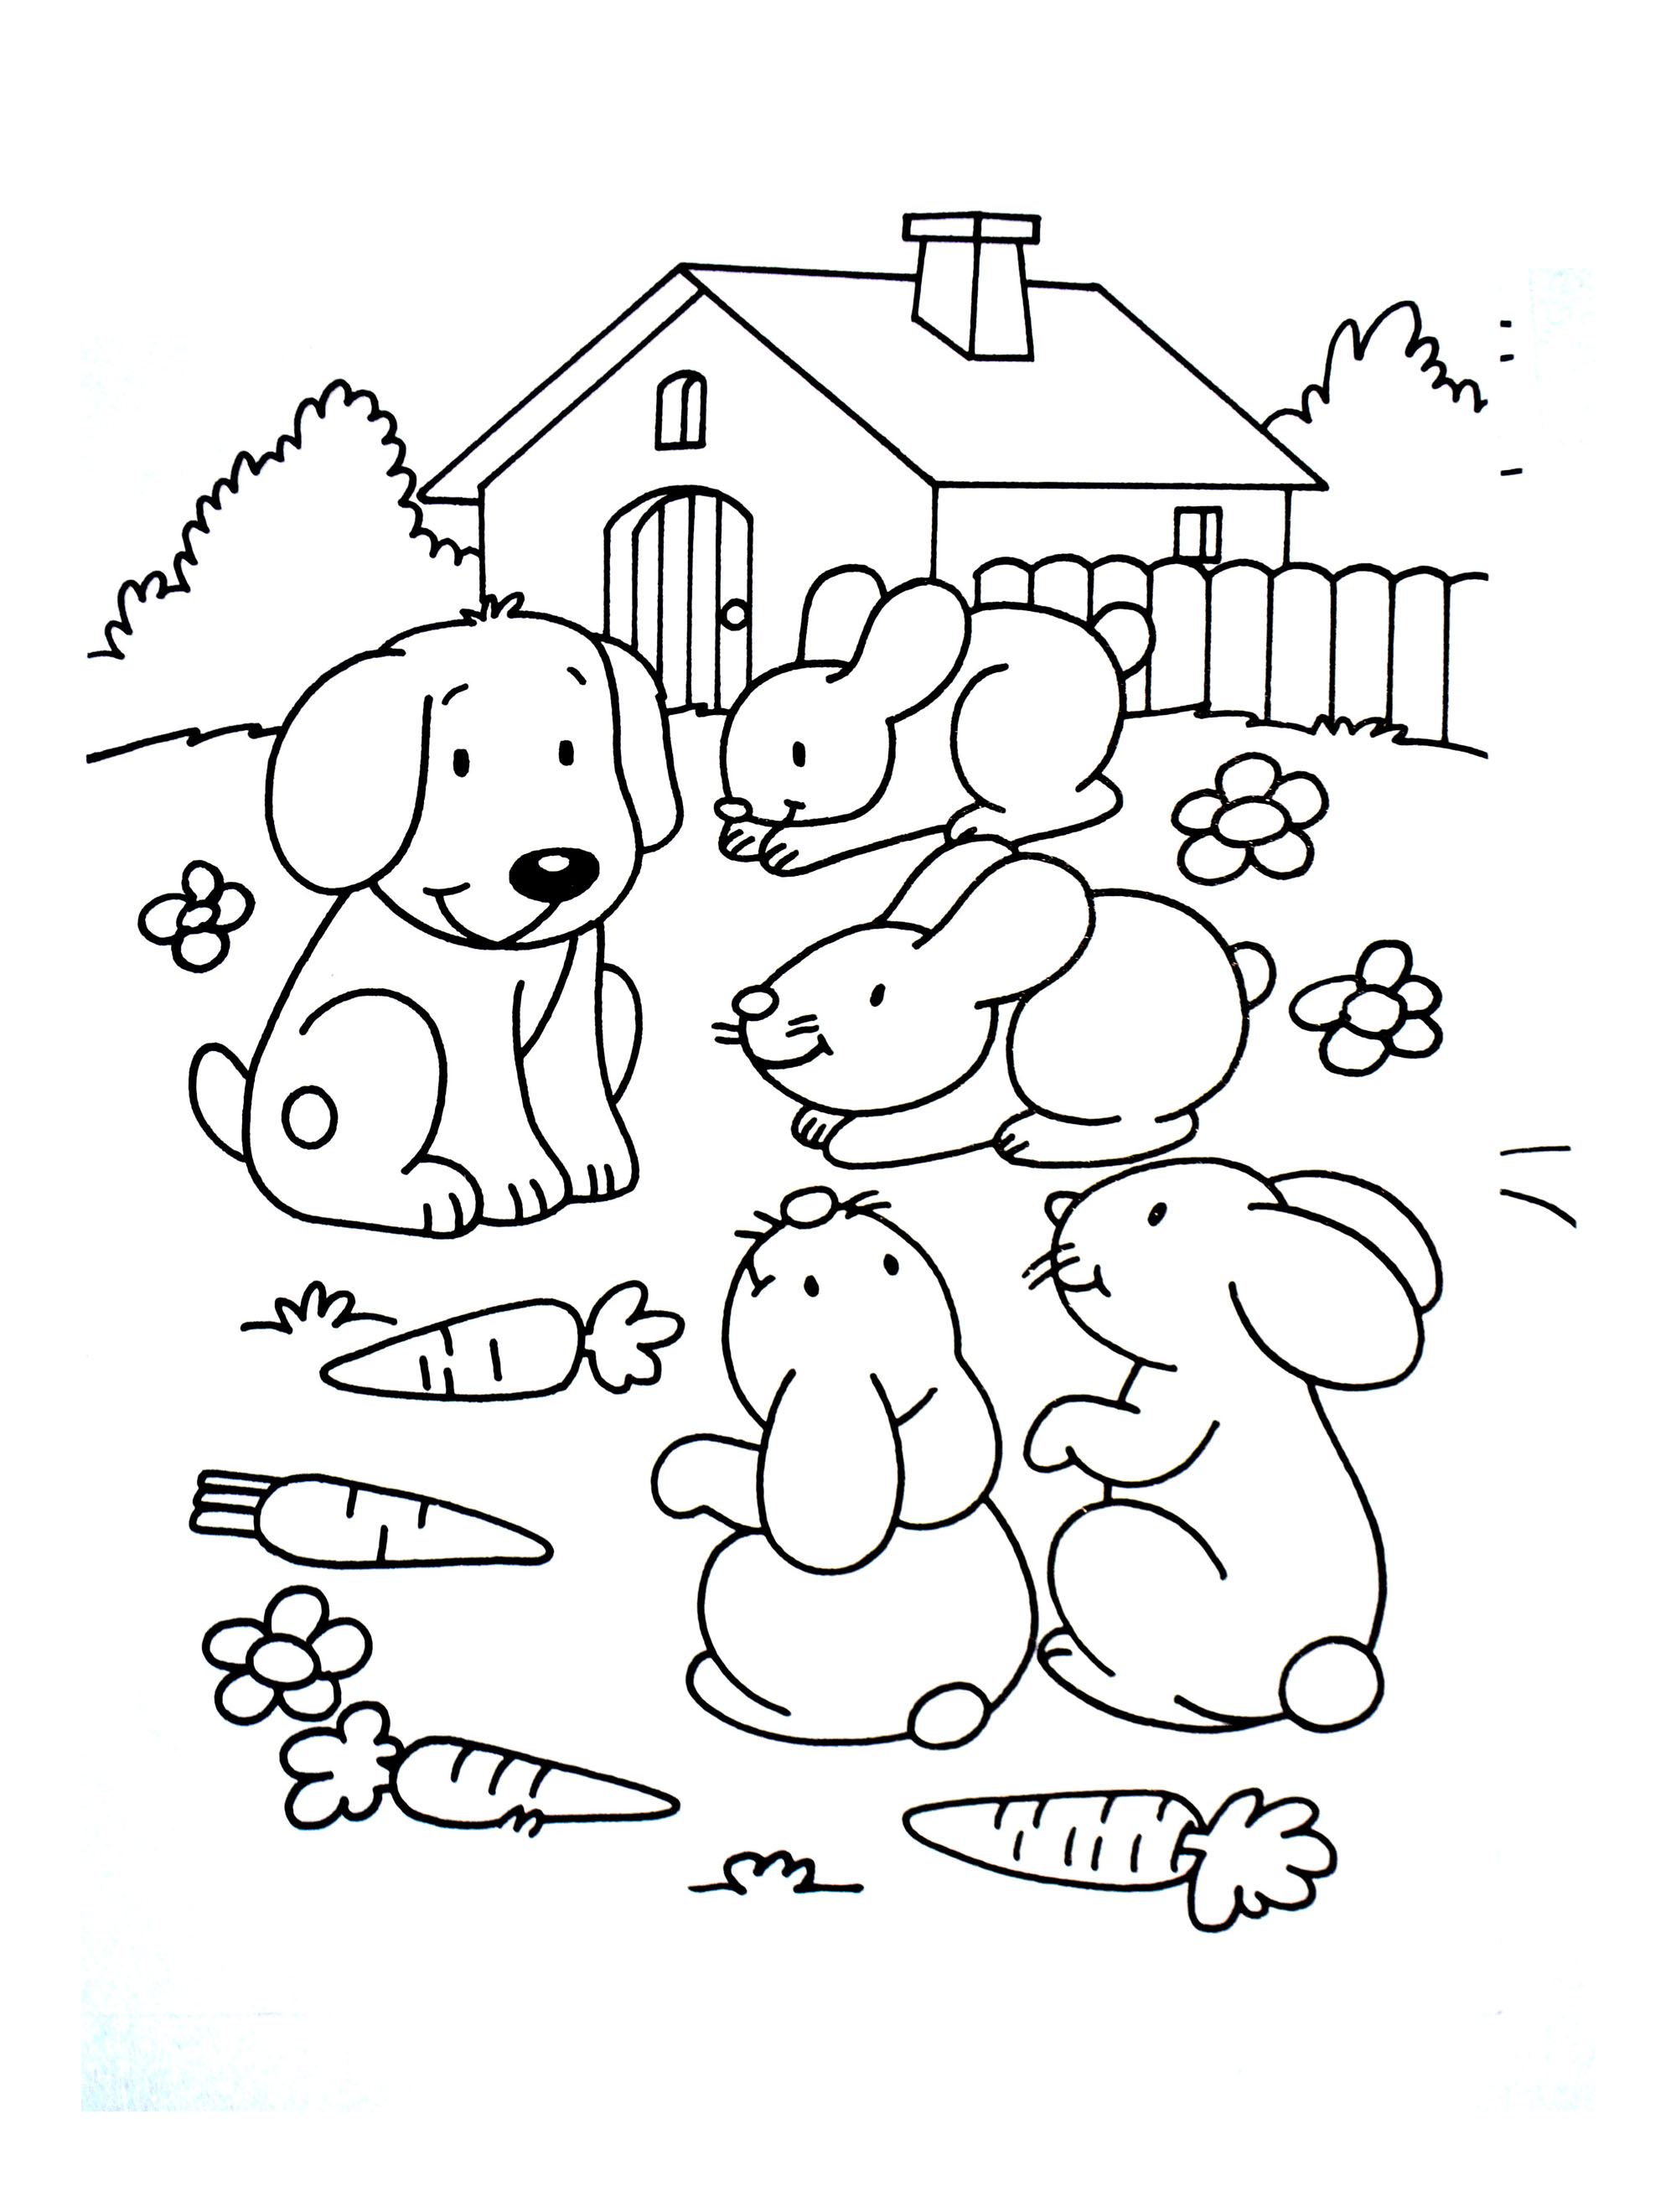 Dog coloring for kids - Dogs Kids Coloring Pages